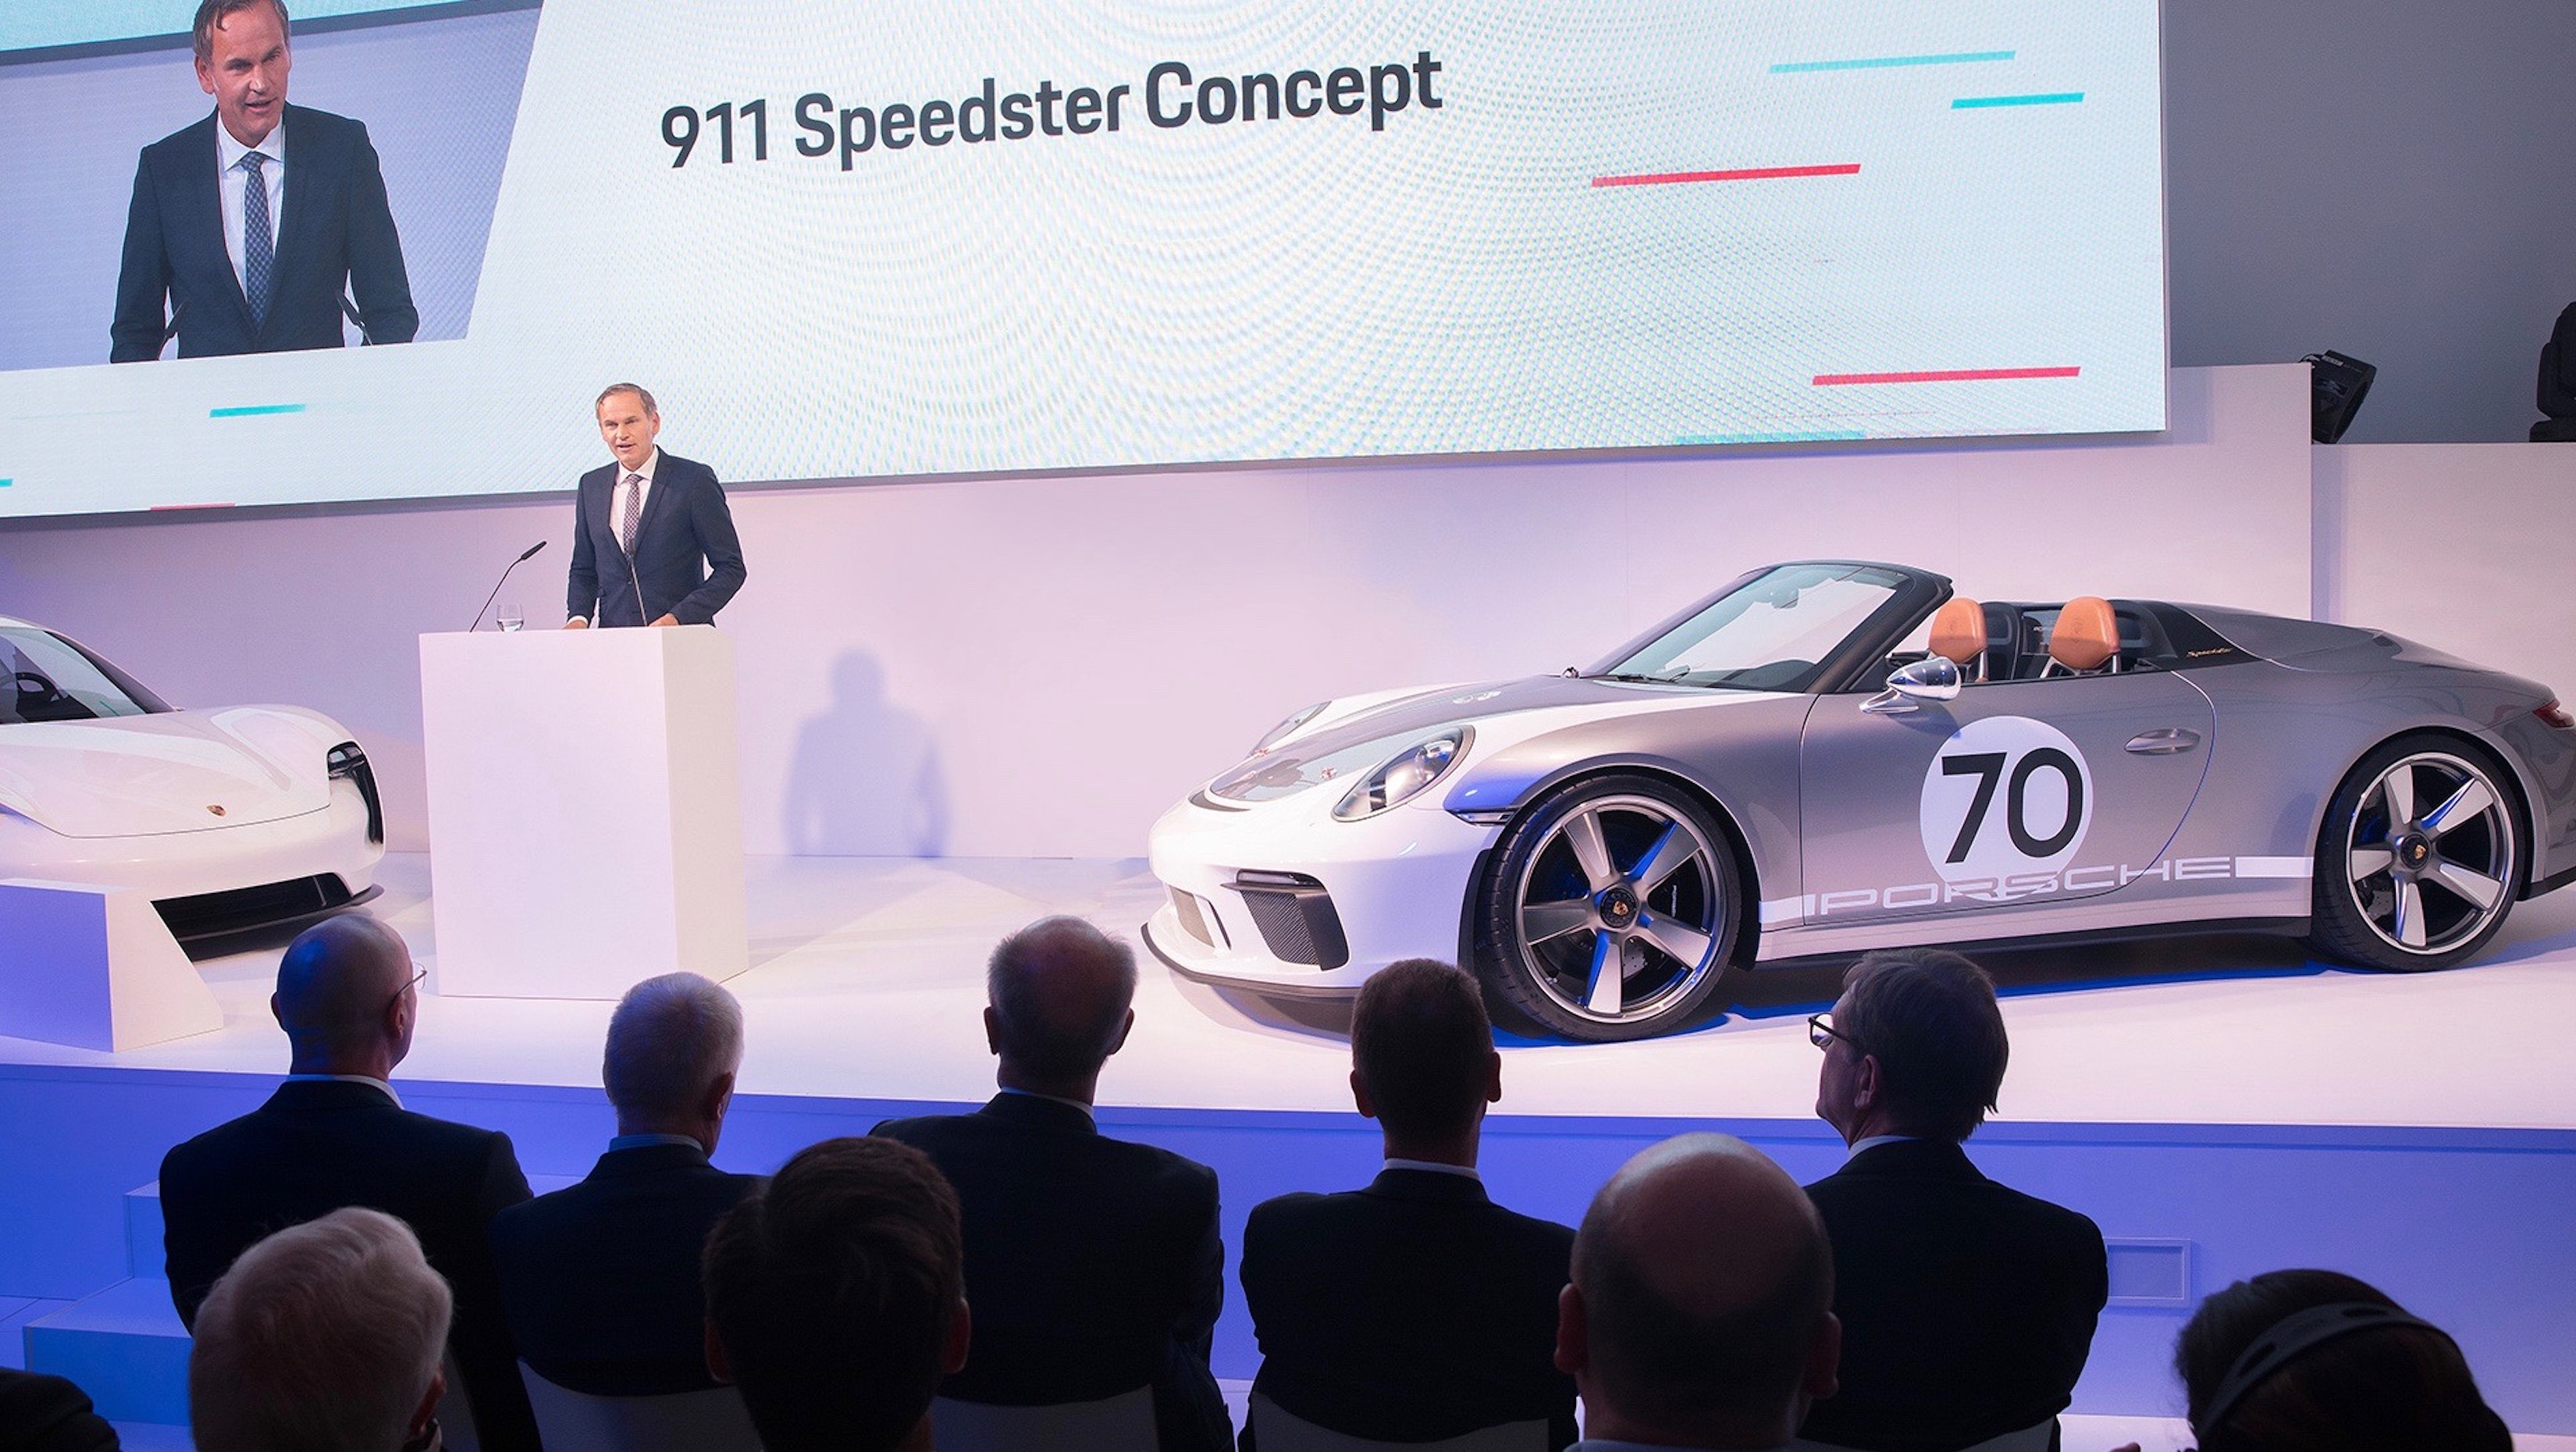 500hp porsche 911 speedster coming in 2019 as limited edition model 113879 1